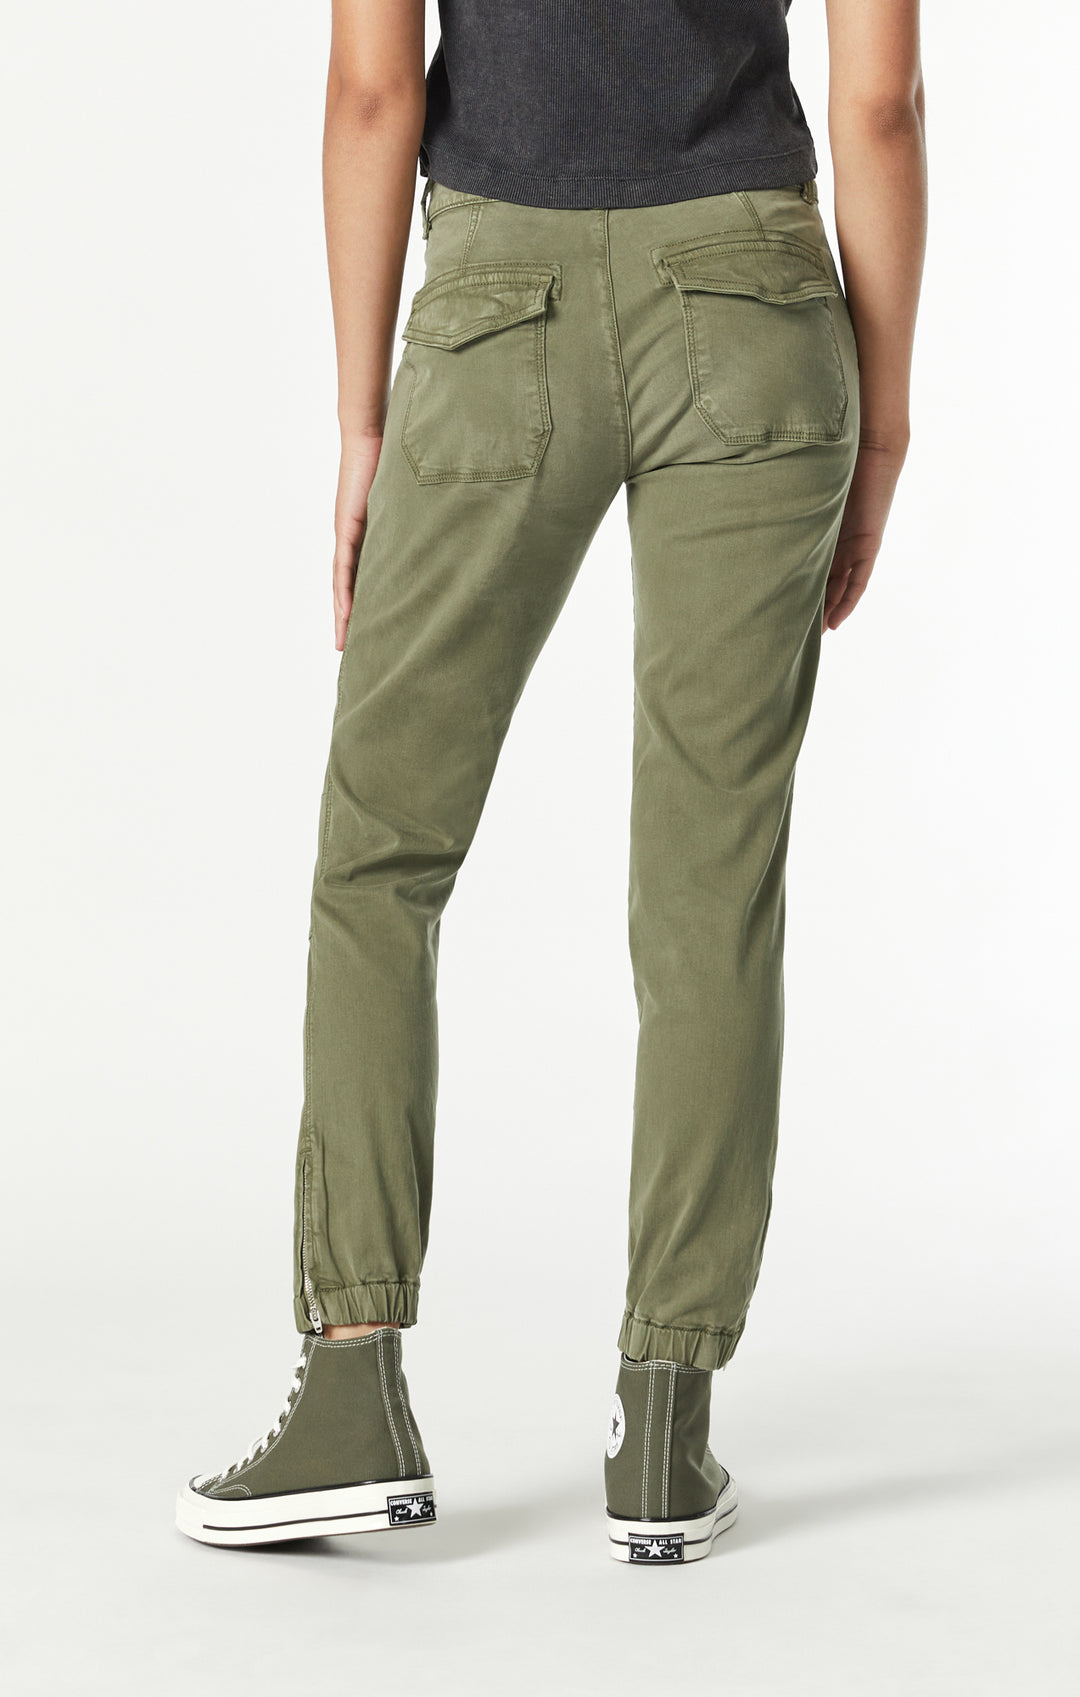 Mavi Jeans Spring 2023 women's casual slim fit cropped green cotton cargo pant - back